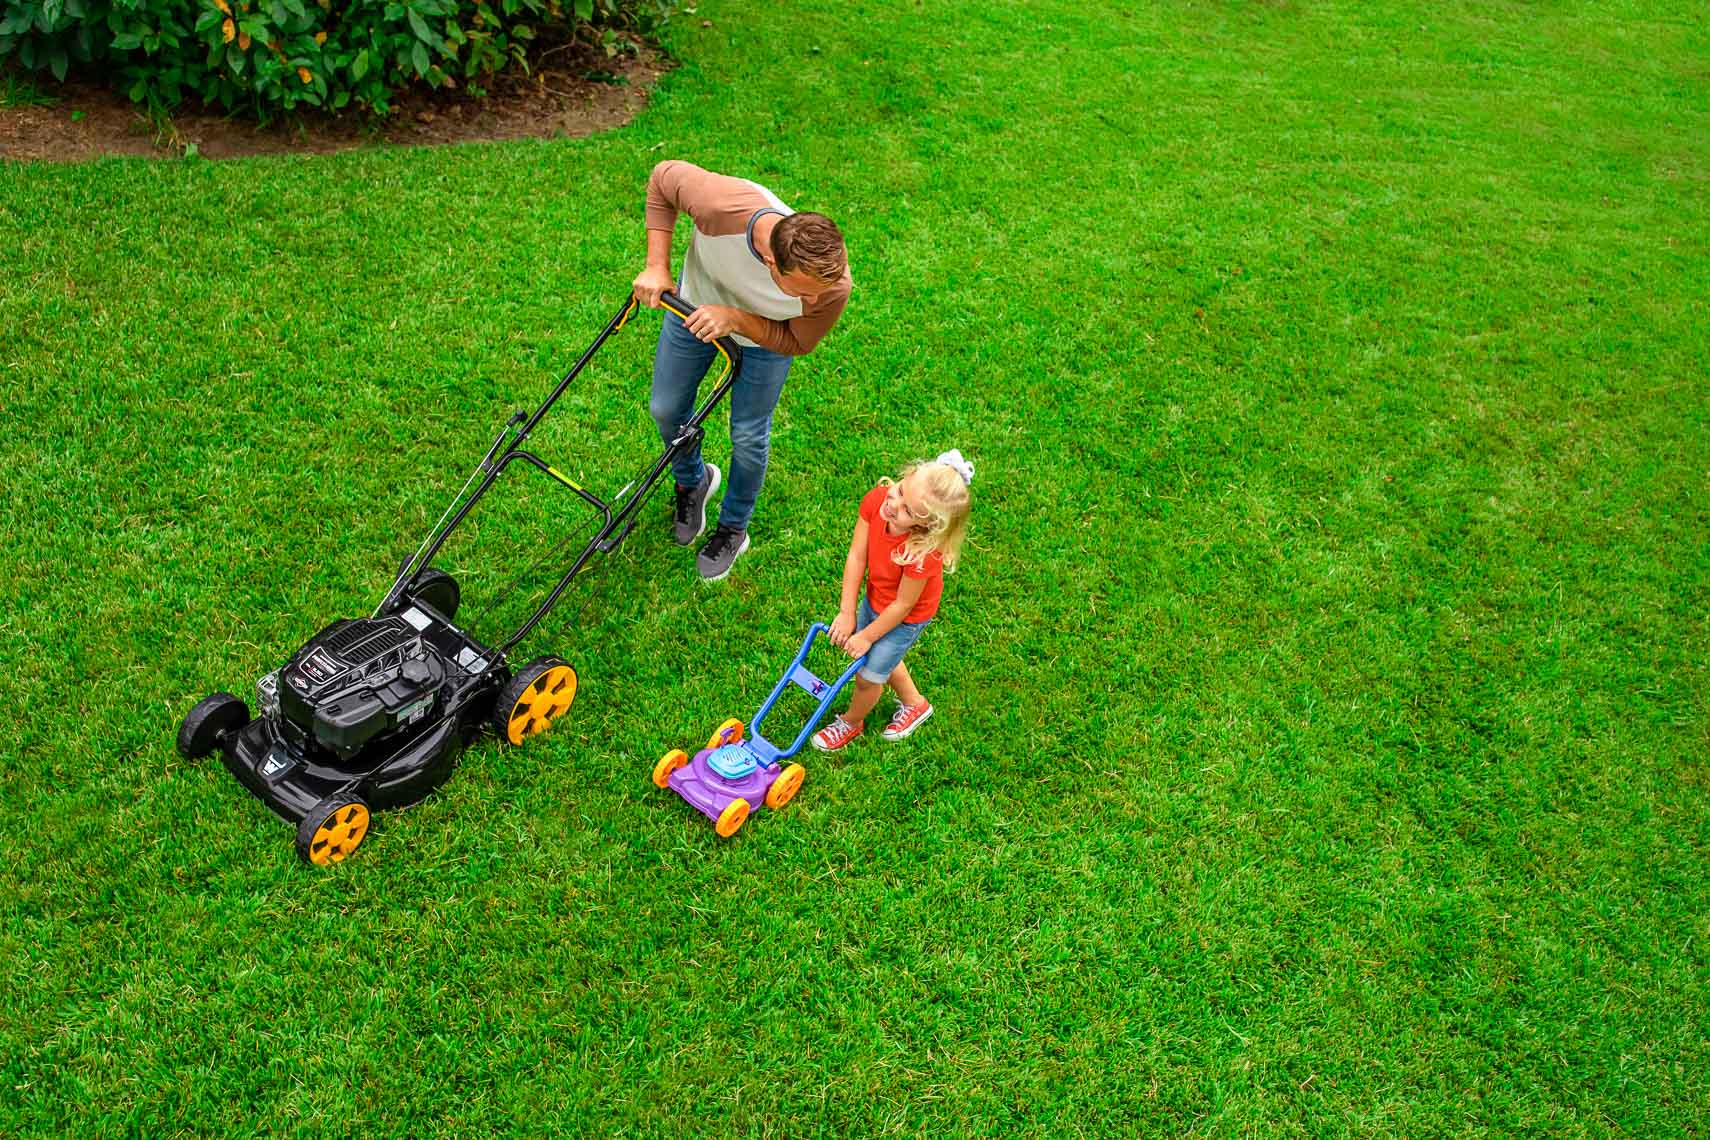 overhead view of father with lawnmower and daughter with toy lawnmower_Robert_Holland_Photographer_Director